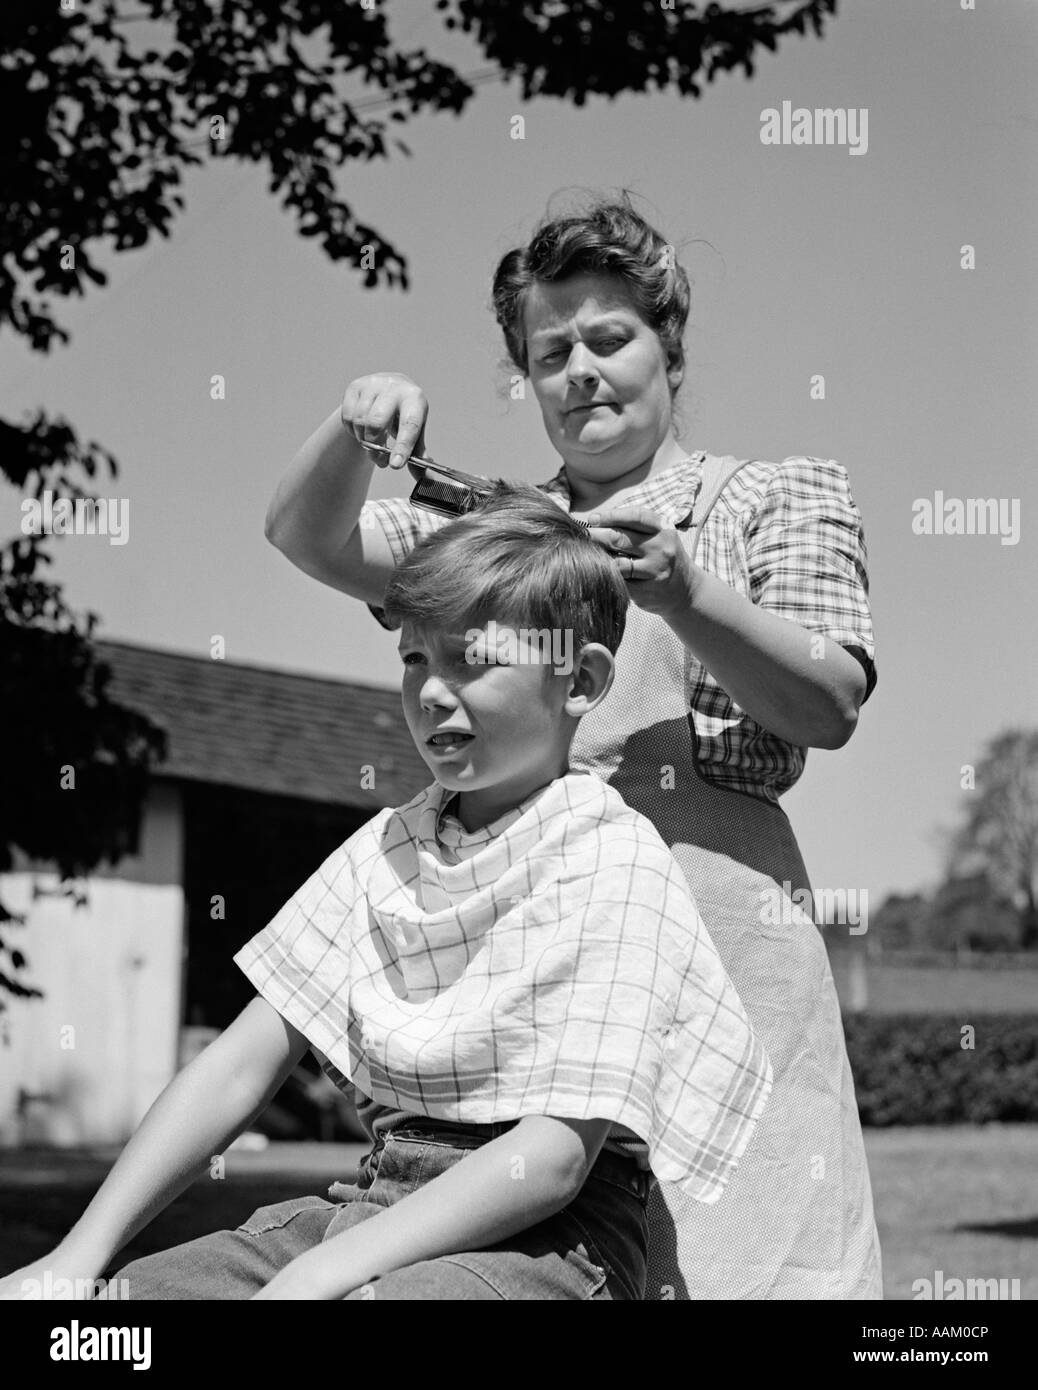 1940s FARMWIFE MOTHER CUTTING BOY SON'S HAIR OUTDOORS UNDER A TREE Stock Photo